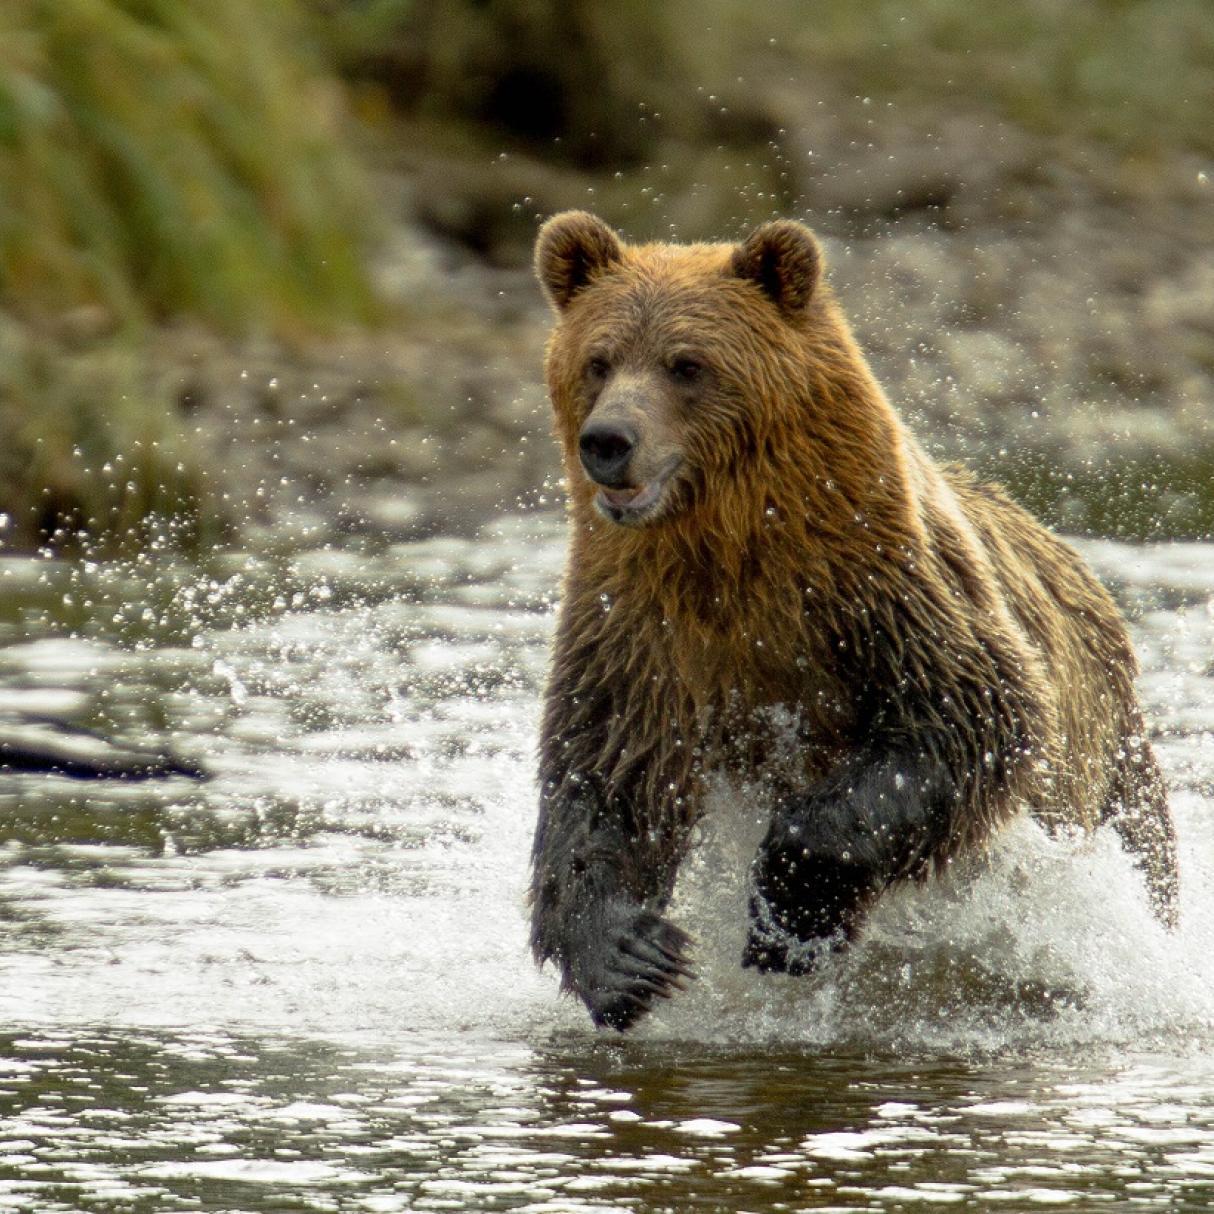 A Grizzly bear running in the water